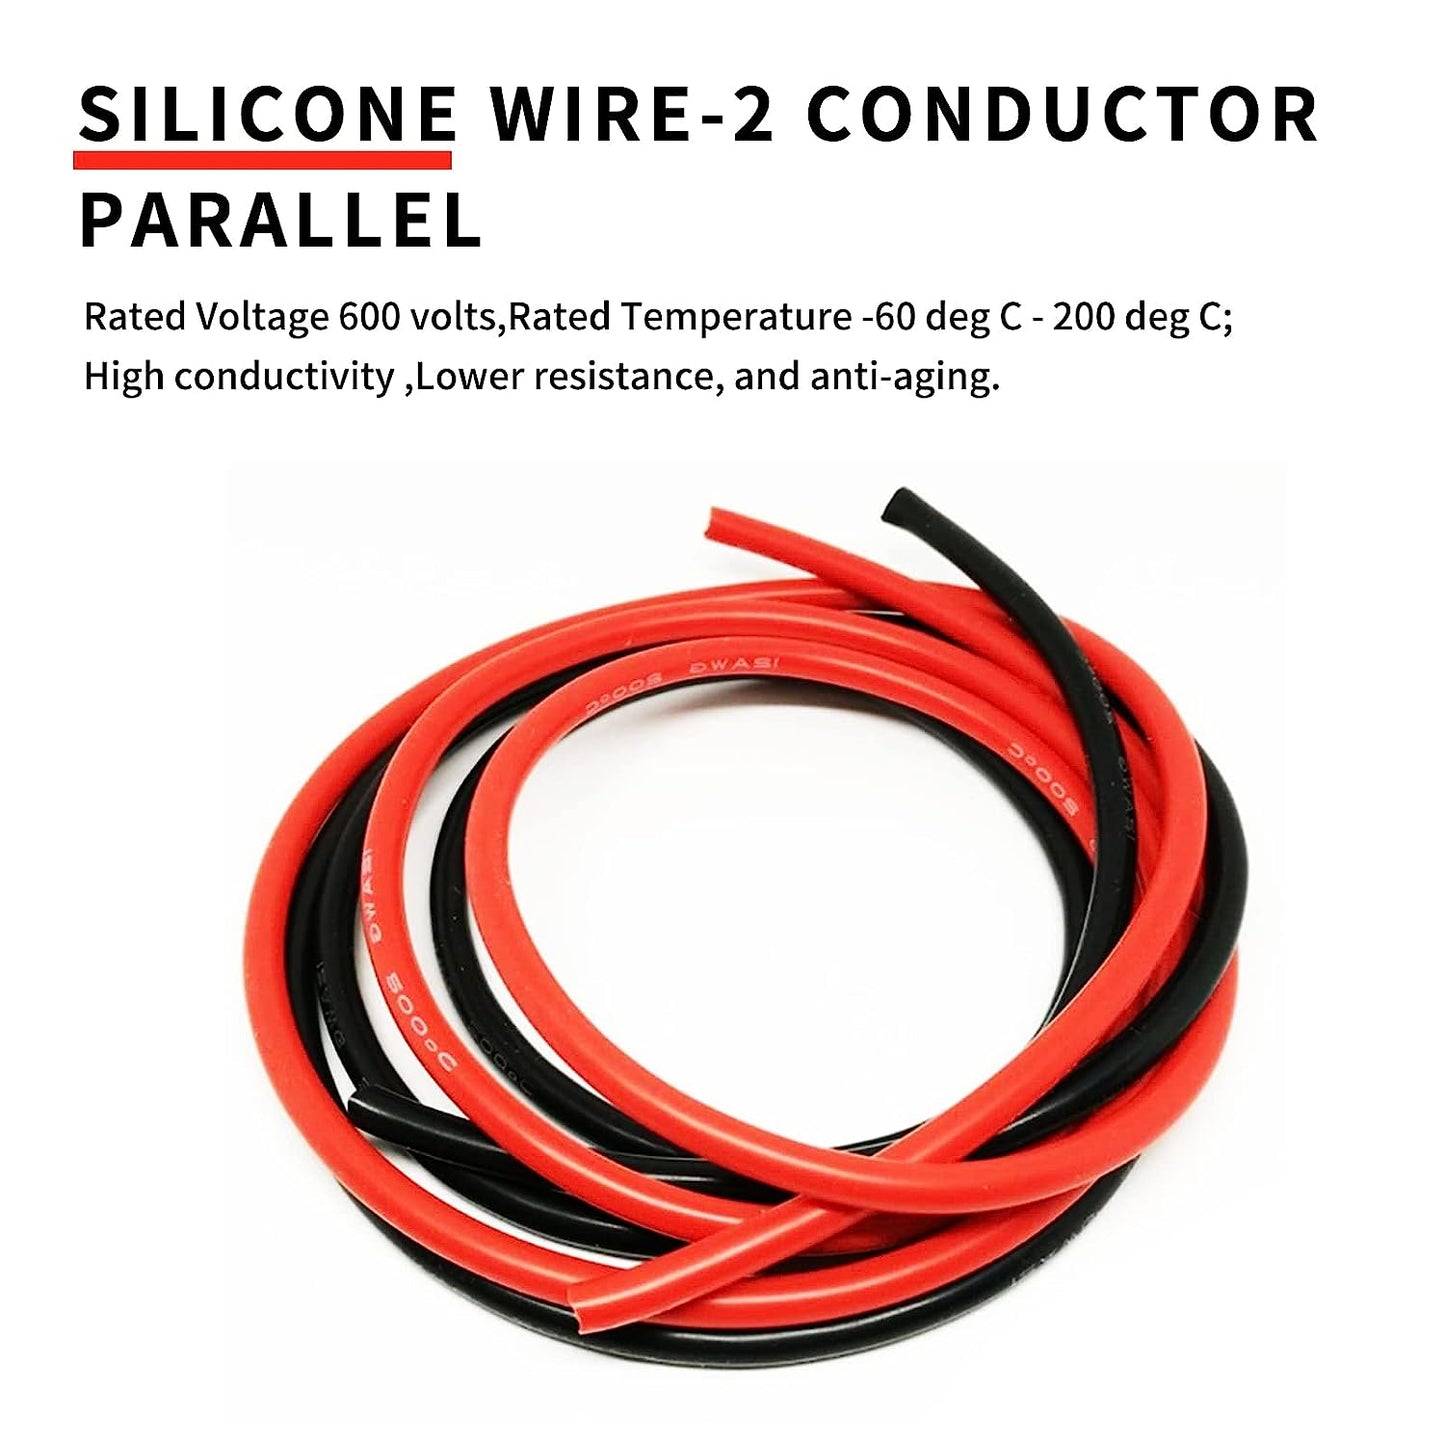 12 AWG Silicone Wire 12 Gauge Wire 20 Feet Flexible Silicone Wire 12AWG Black Stranded Copper Electric Wire